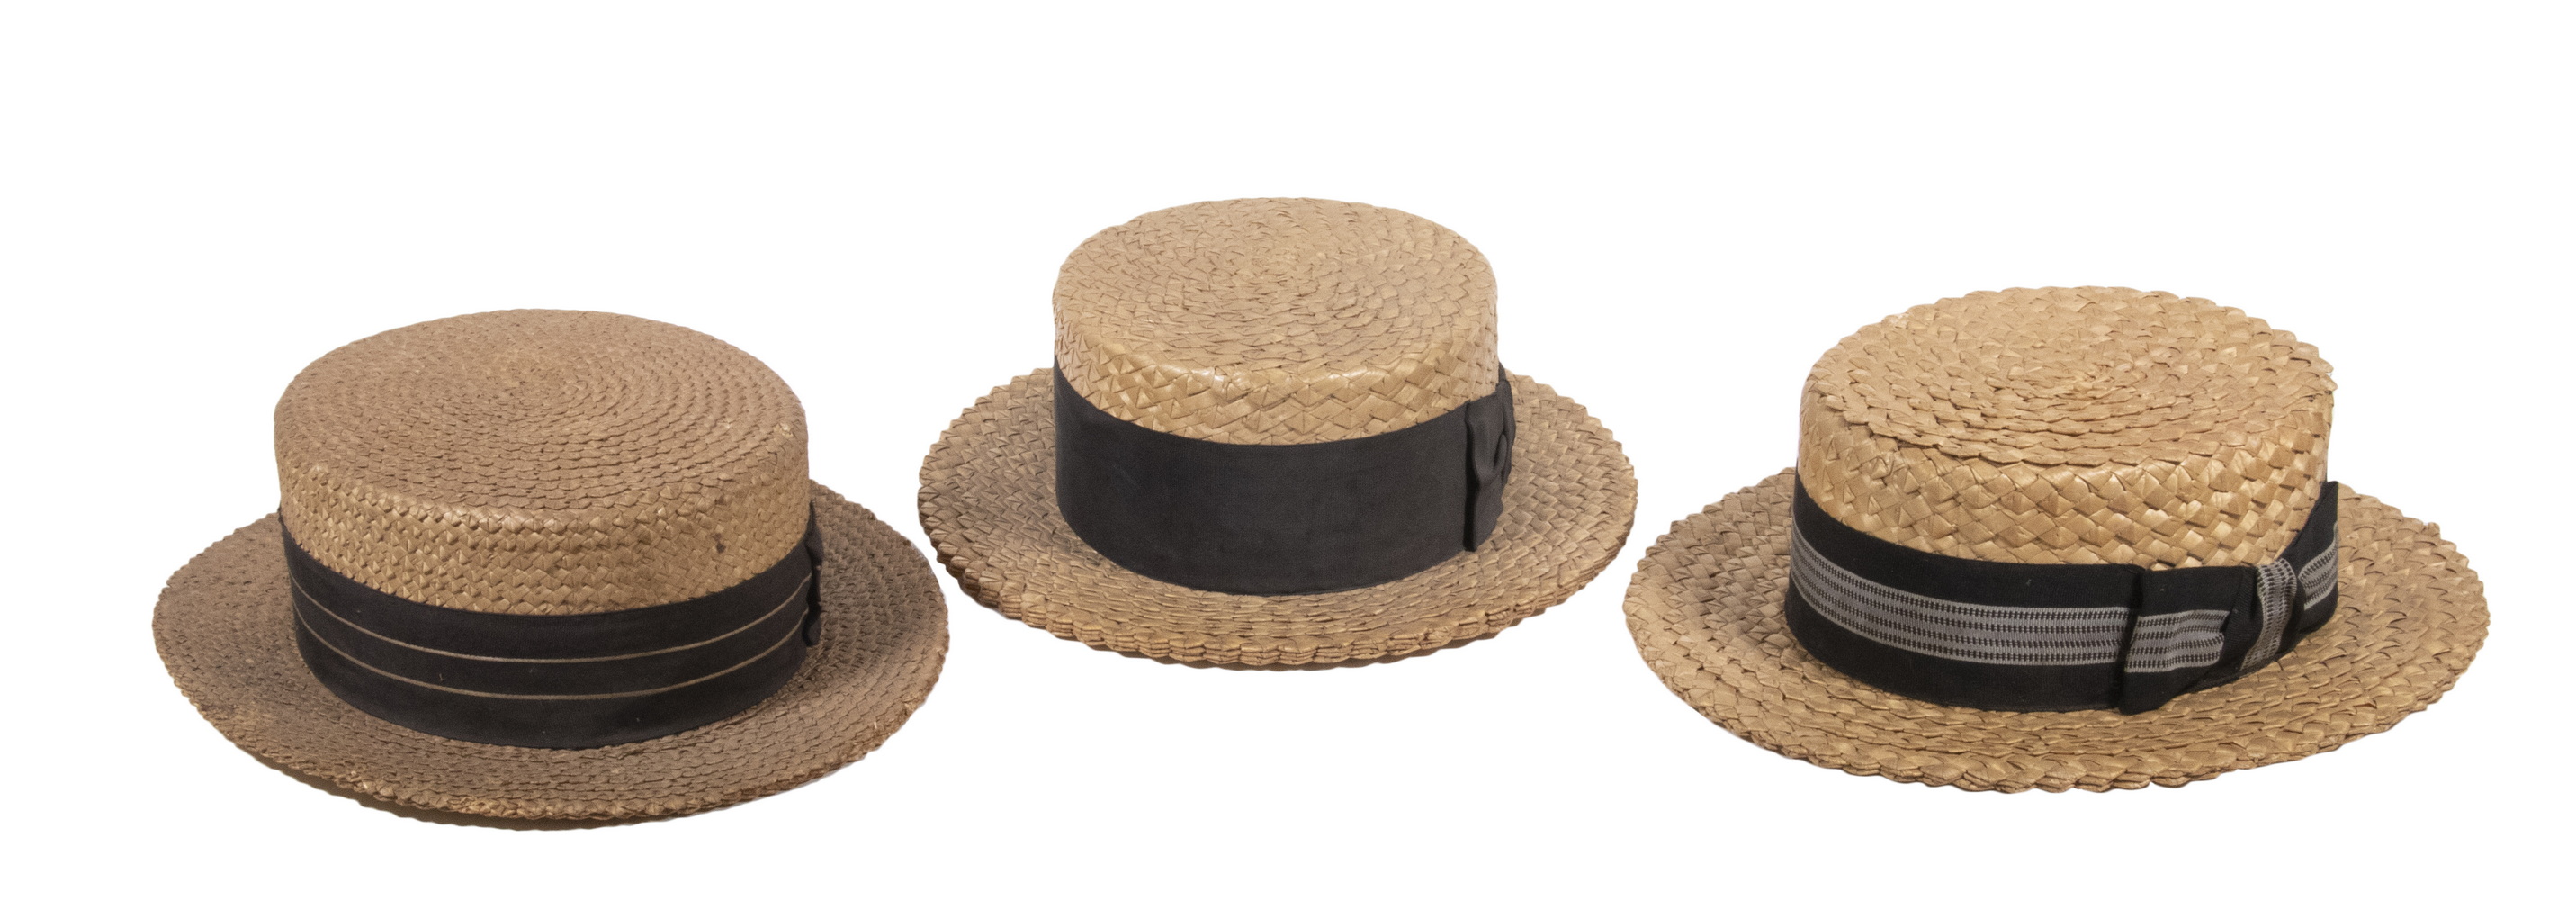 STRAW BOATER HATS Lot of 3 Vintage 2d679a